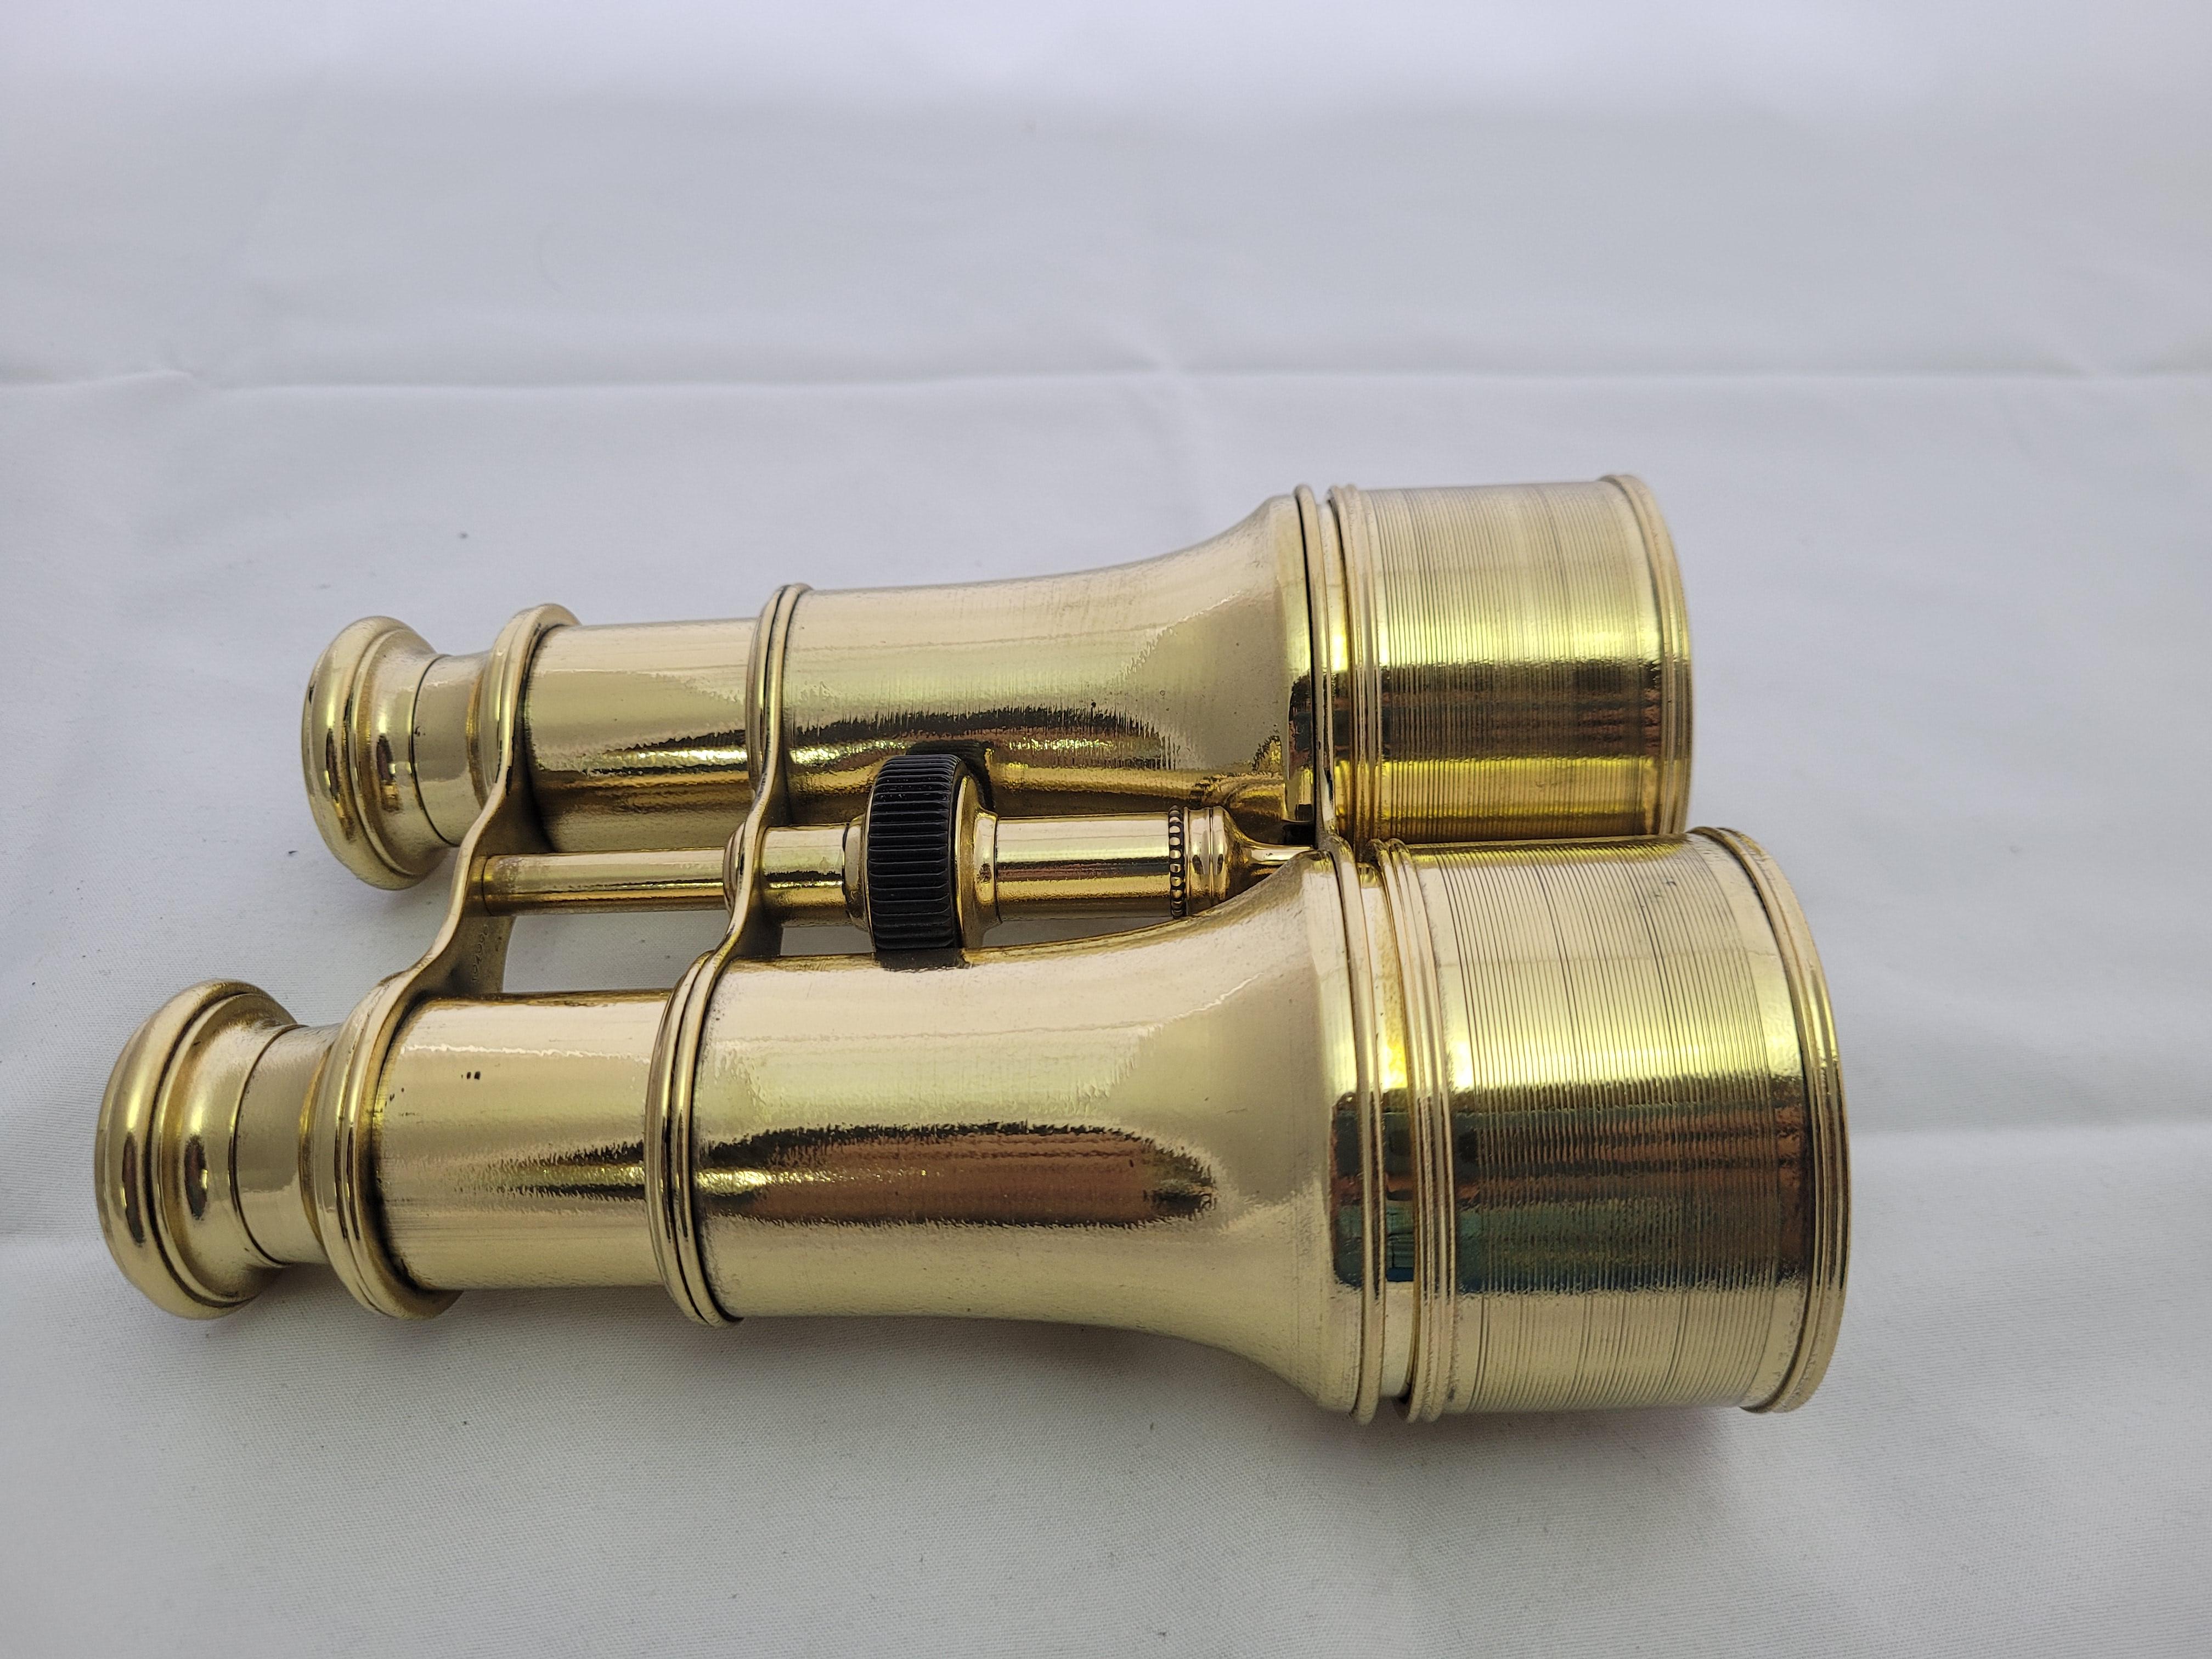 French Yachting Binoculars by Lemaire Fabt, Paris 3